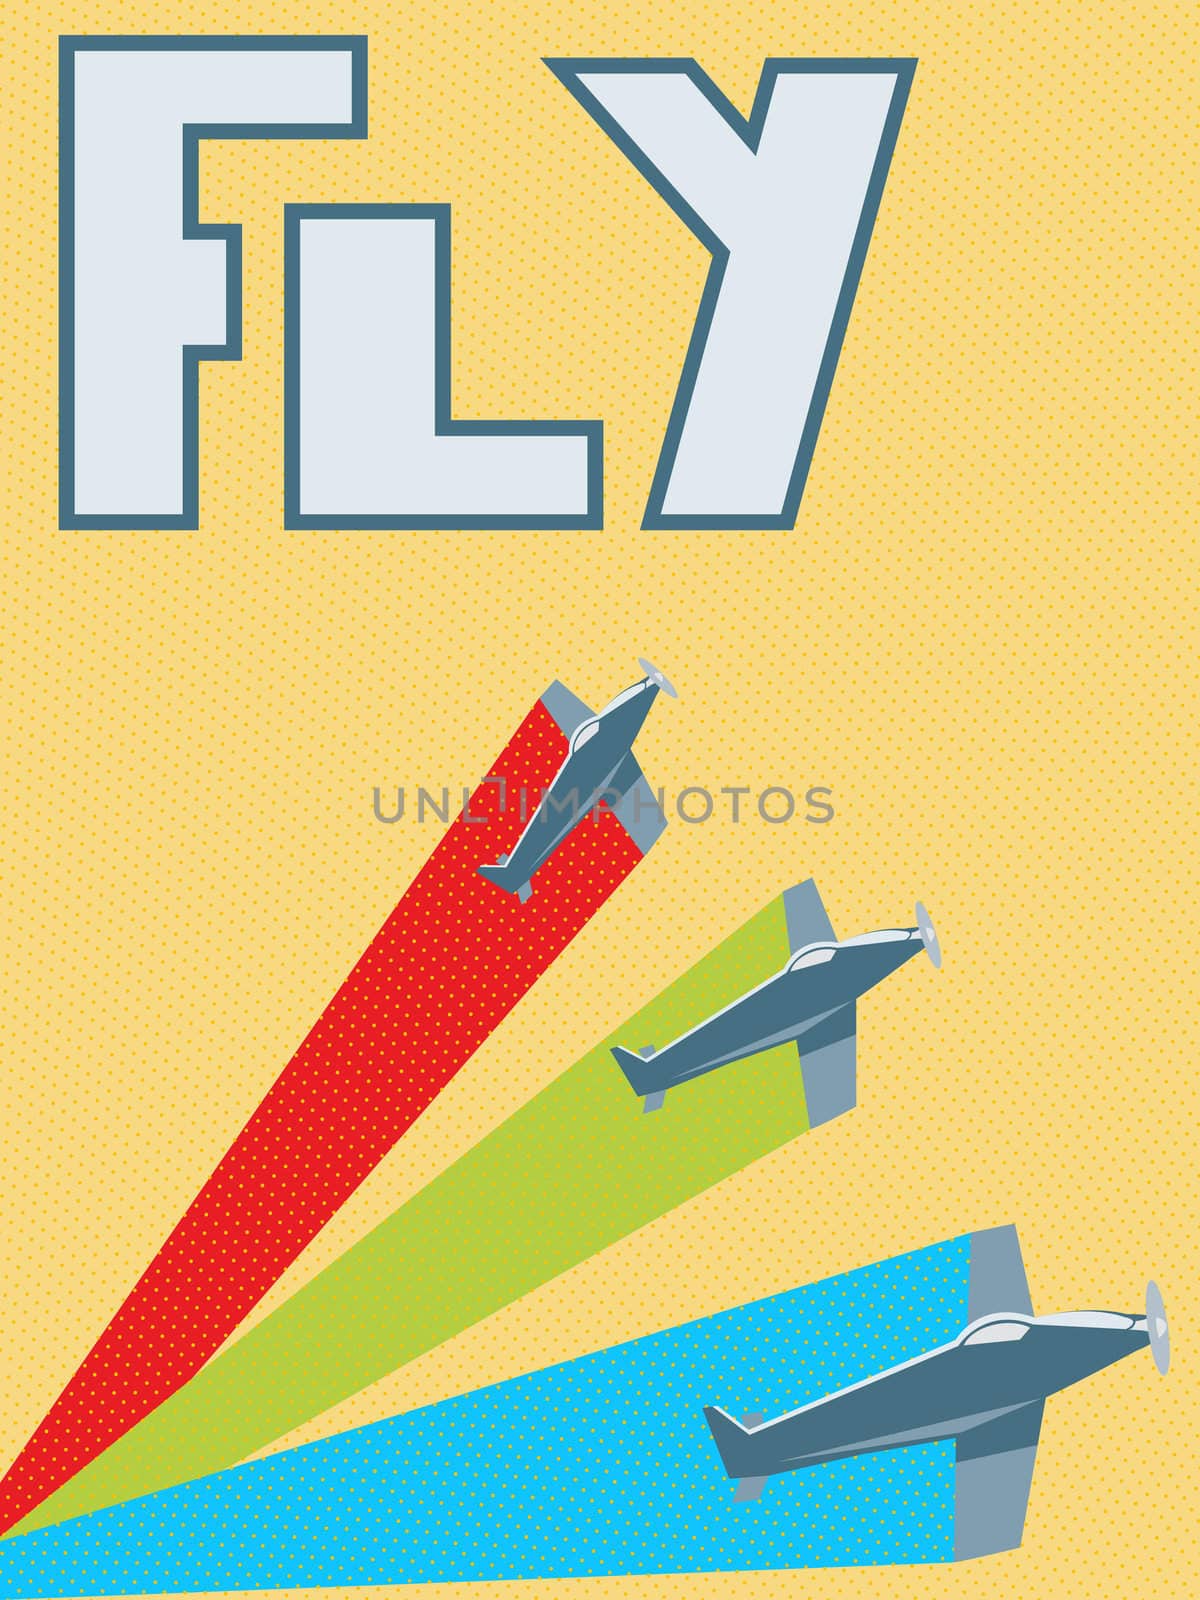 abstract retro poster with stylized planes